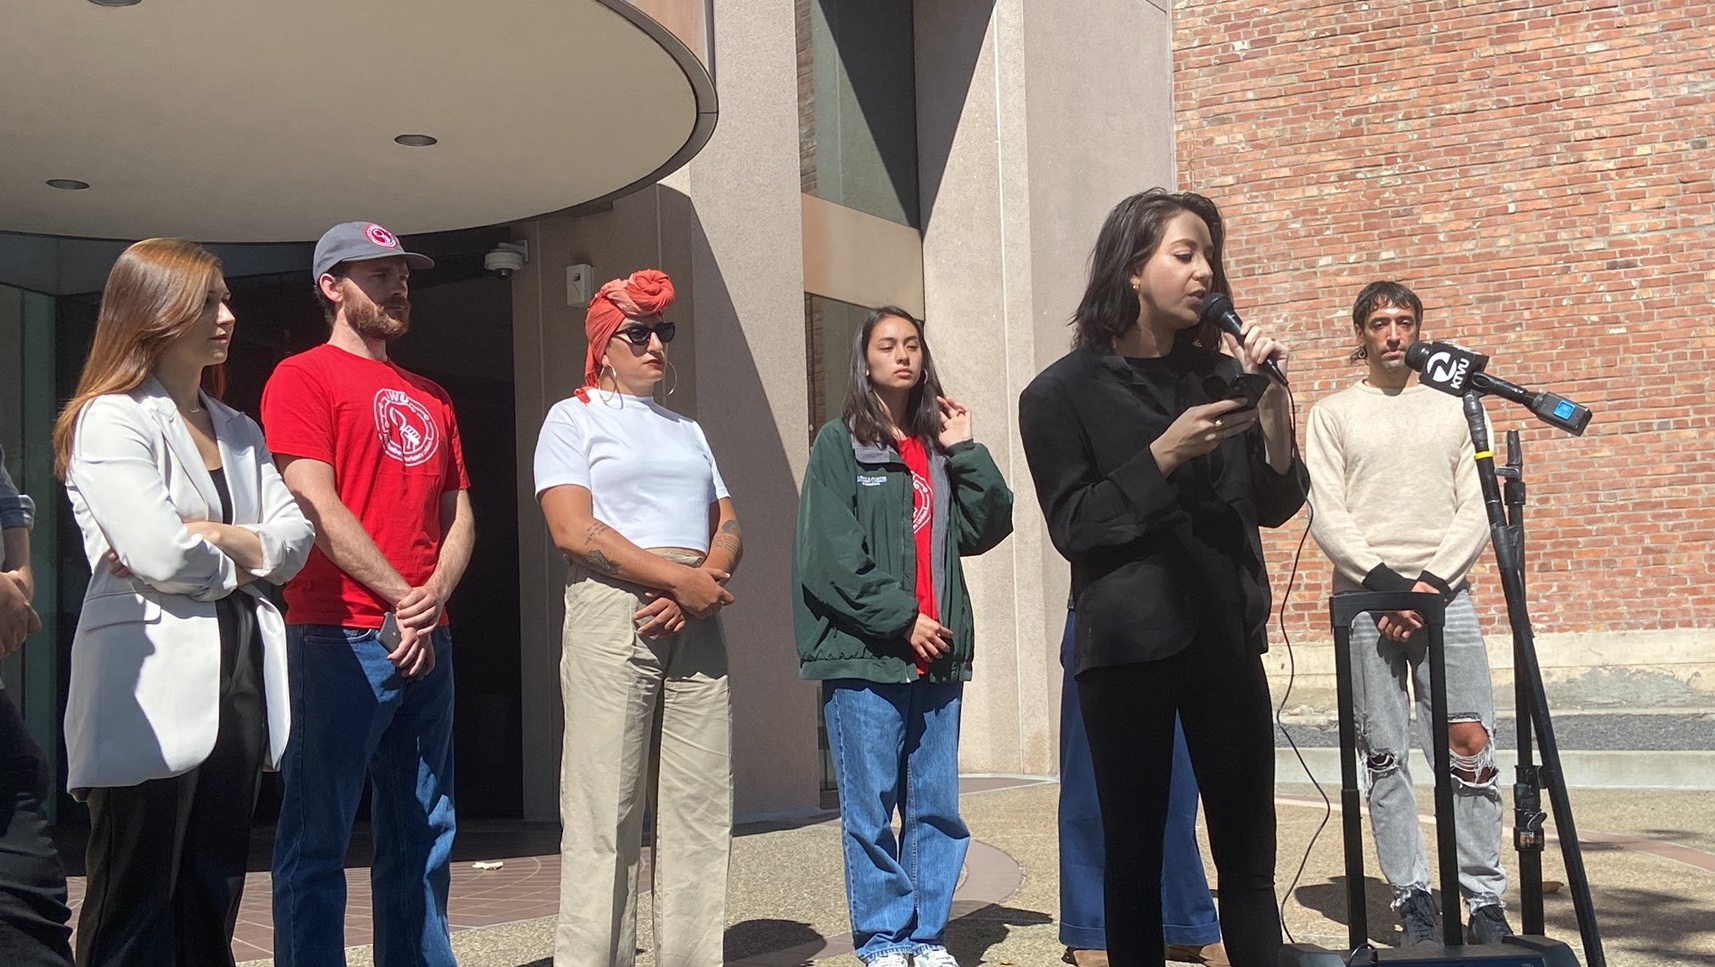 Eight Alphabet workers in casual clothing speaking on a mic in front of headquarters with a brick wall behind them